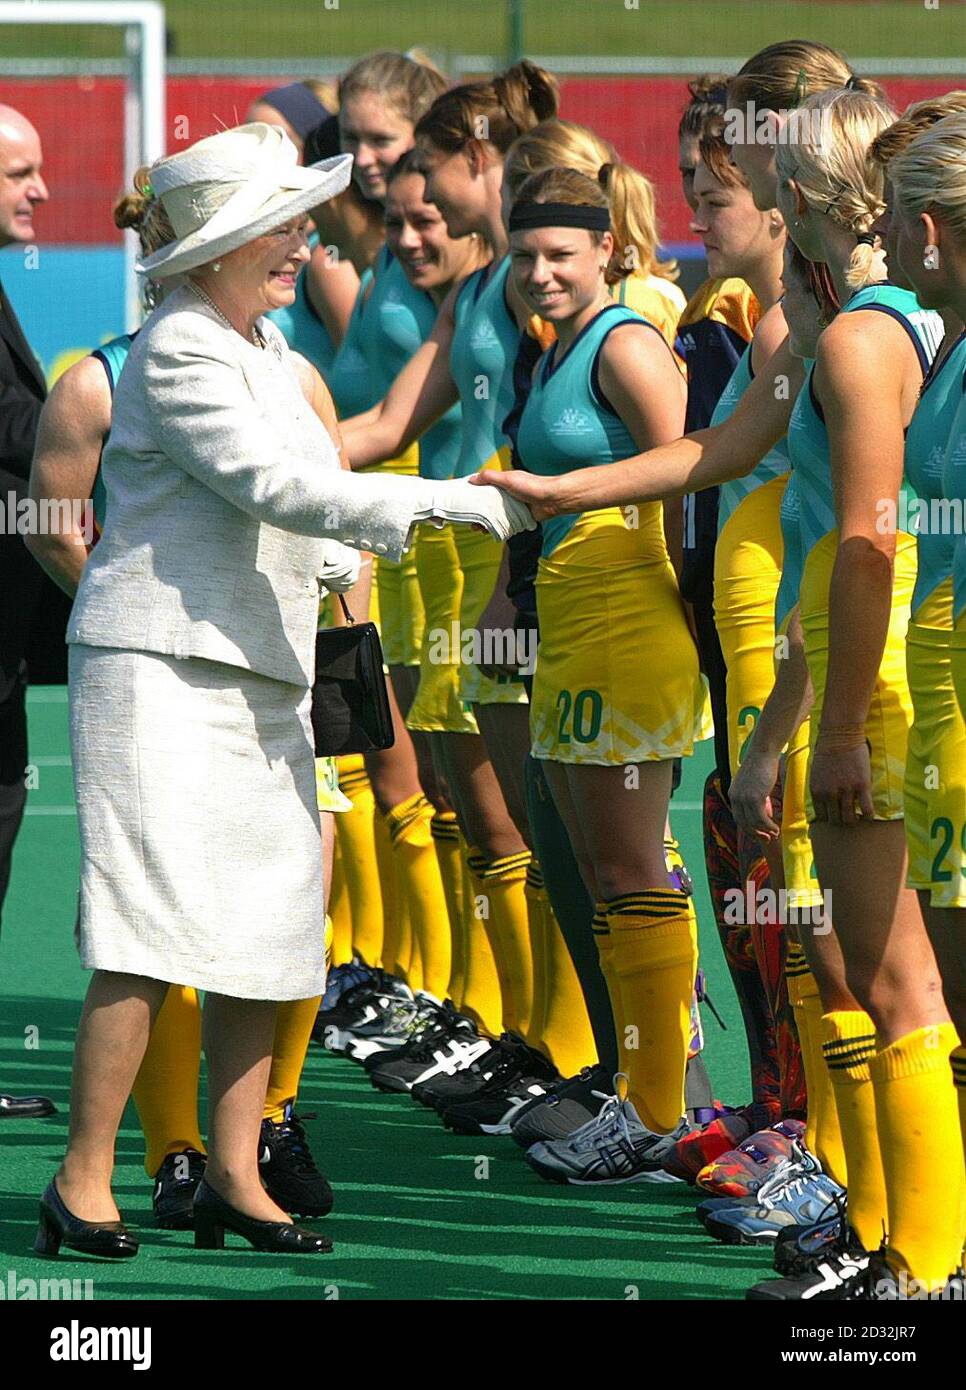 Queen Elizabeth II  meets members of the Australian Ladies Hockey team before their match against Scotland, on the 1st day of the Commonwealth Games in Manchester. Stock Photo